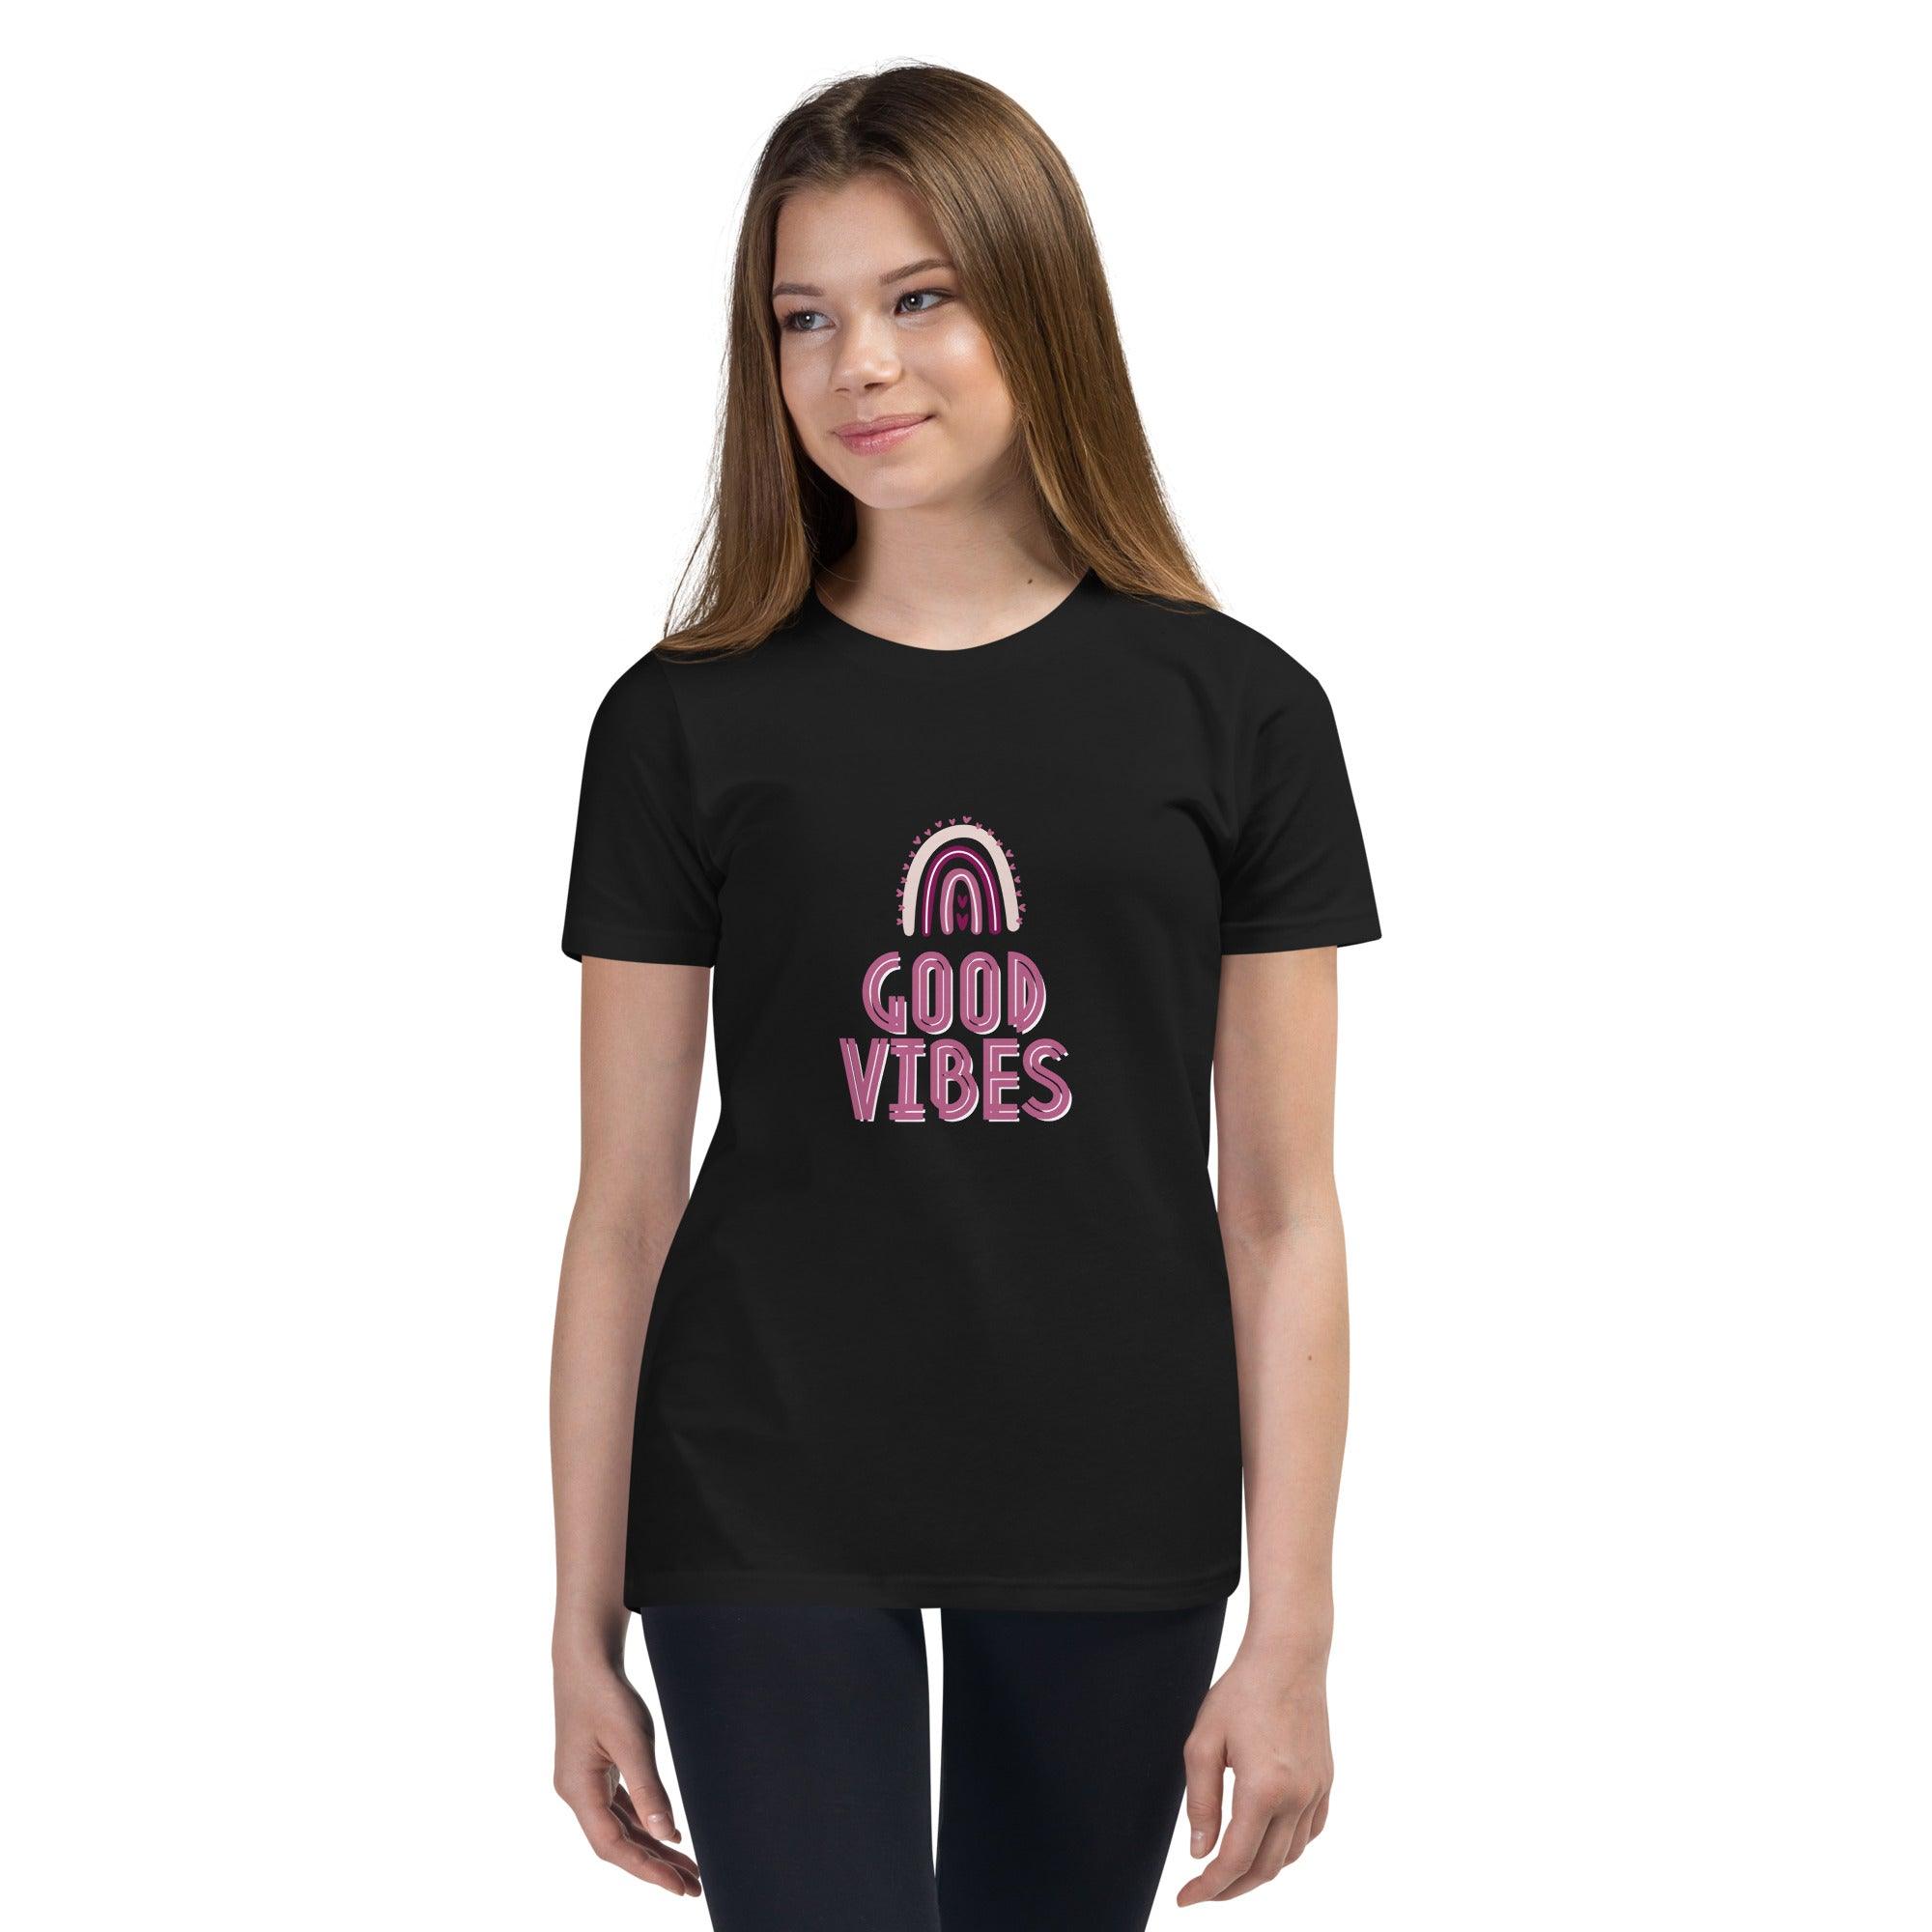 Good Vibes Youth Short Sleeve T-Shirt | Youth Positive Affirmation T-Shirt - Affirm Effect